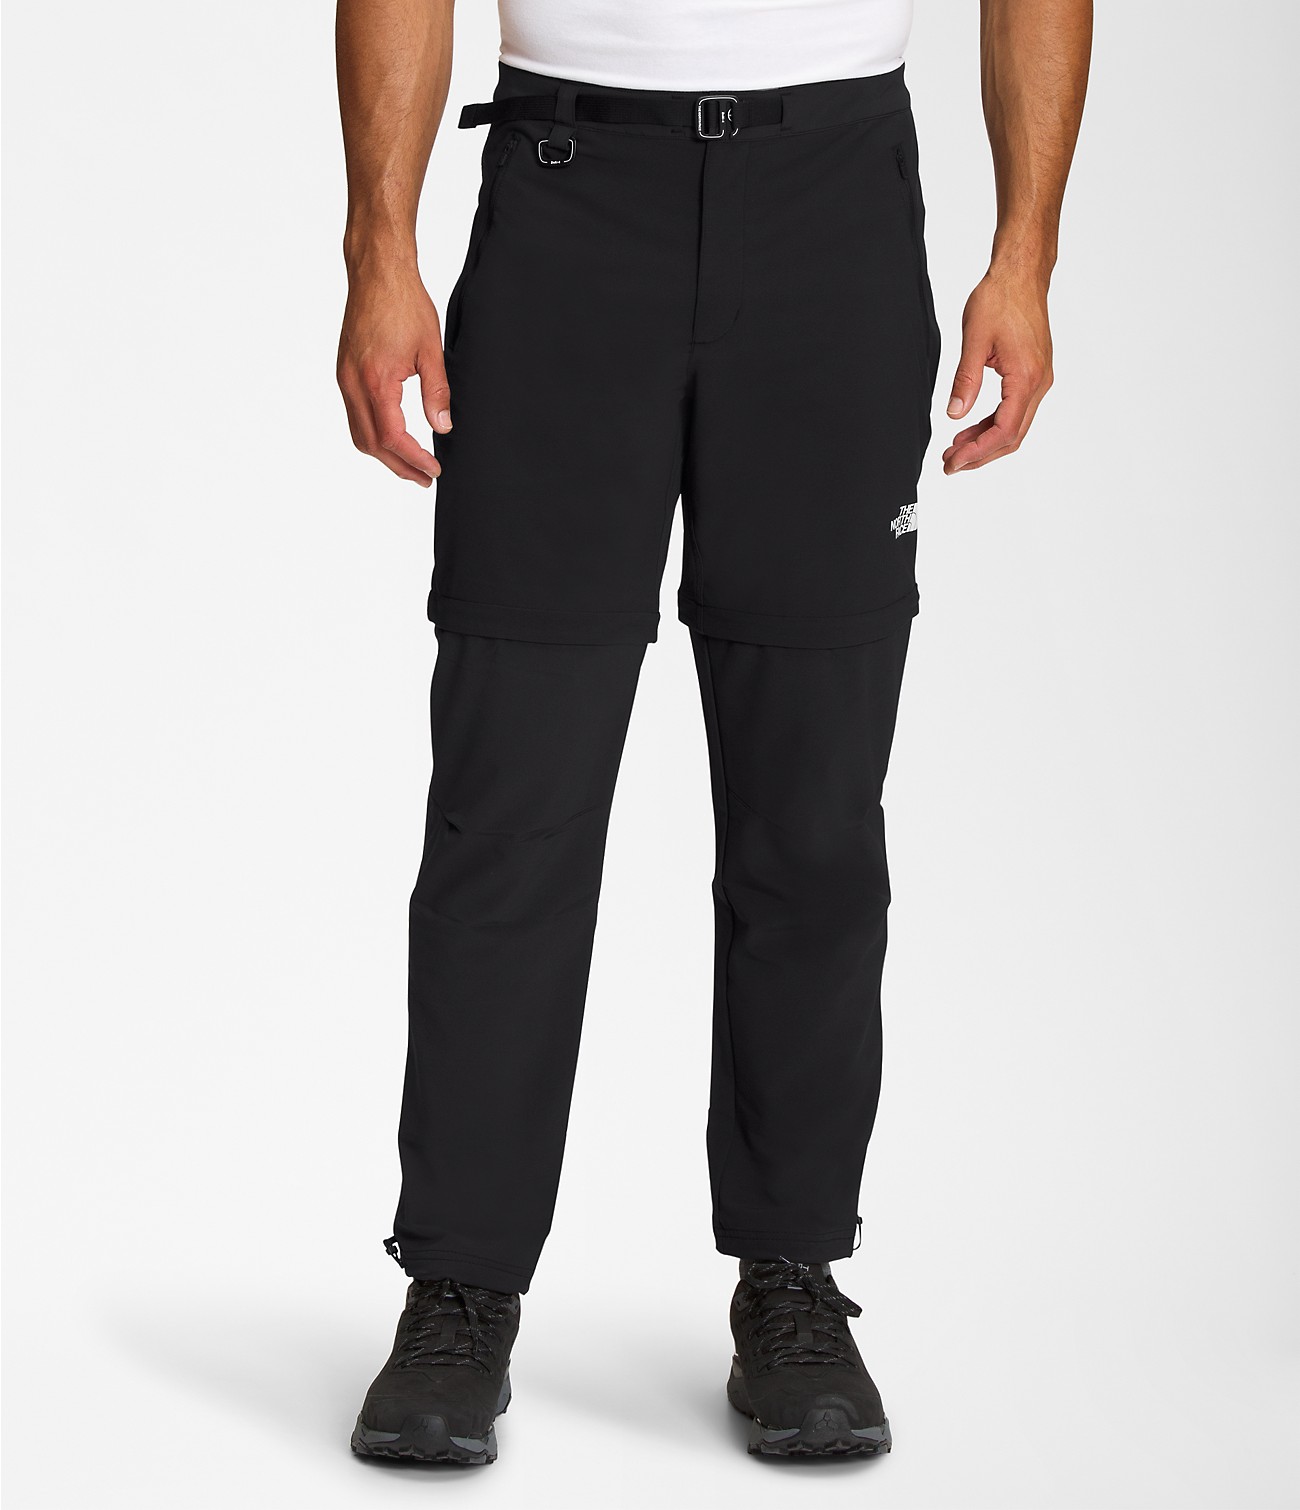 Unlock Wilderness' choice in the Craghoppers Vs North Face comparison, the Paramount Pro Convertible Pants by The North Face